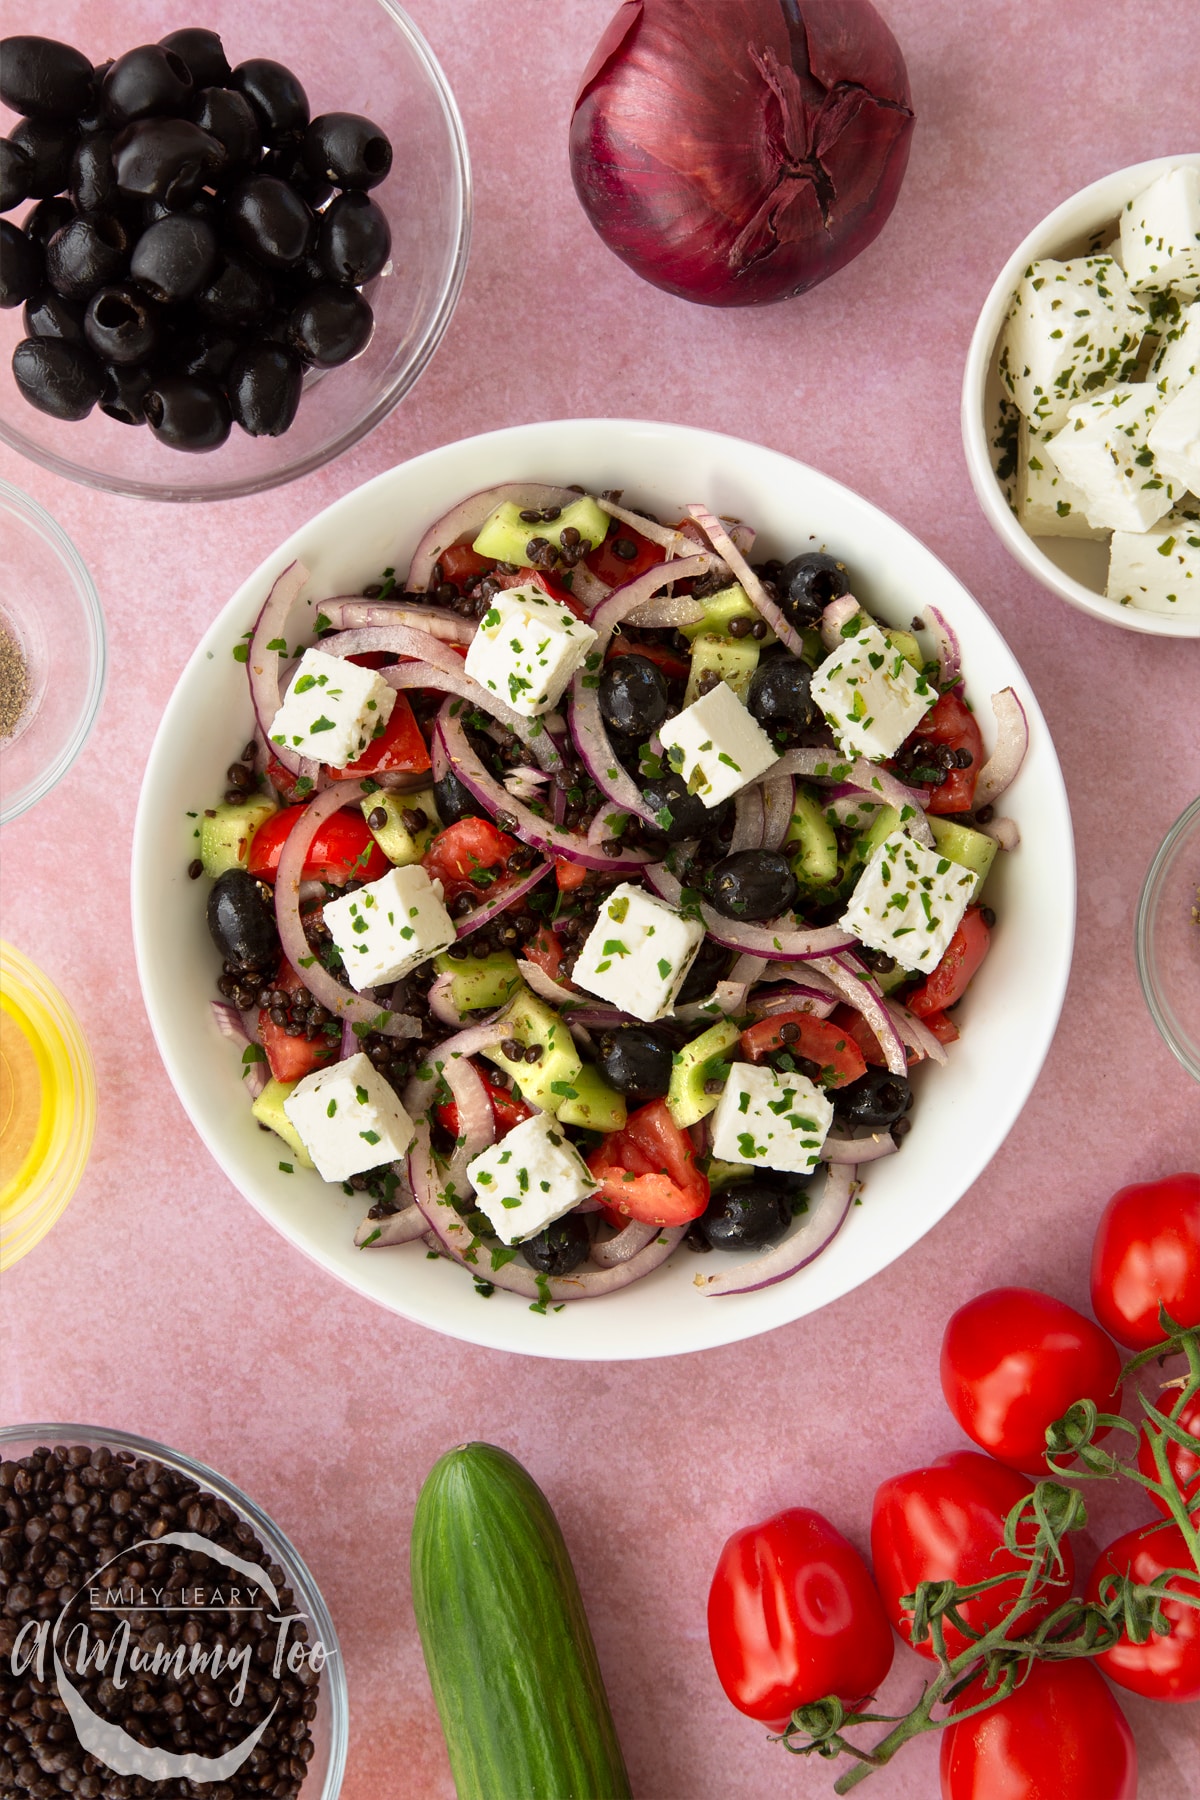 Greek lentil salad made with olives and onions in a white serving bowl. The salad is topped with squares of feta and garnished with fresh parsley